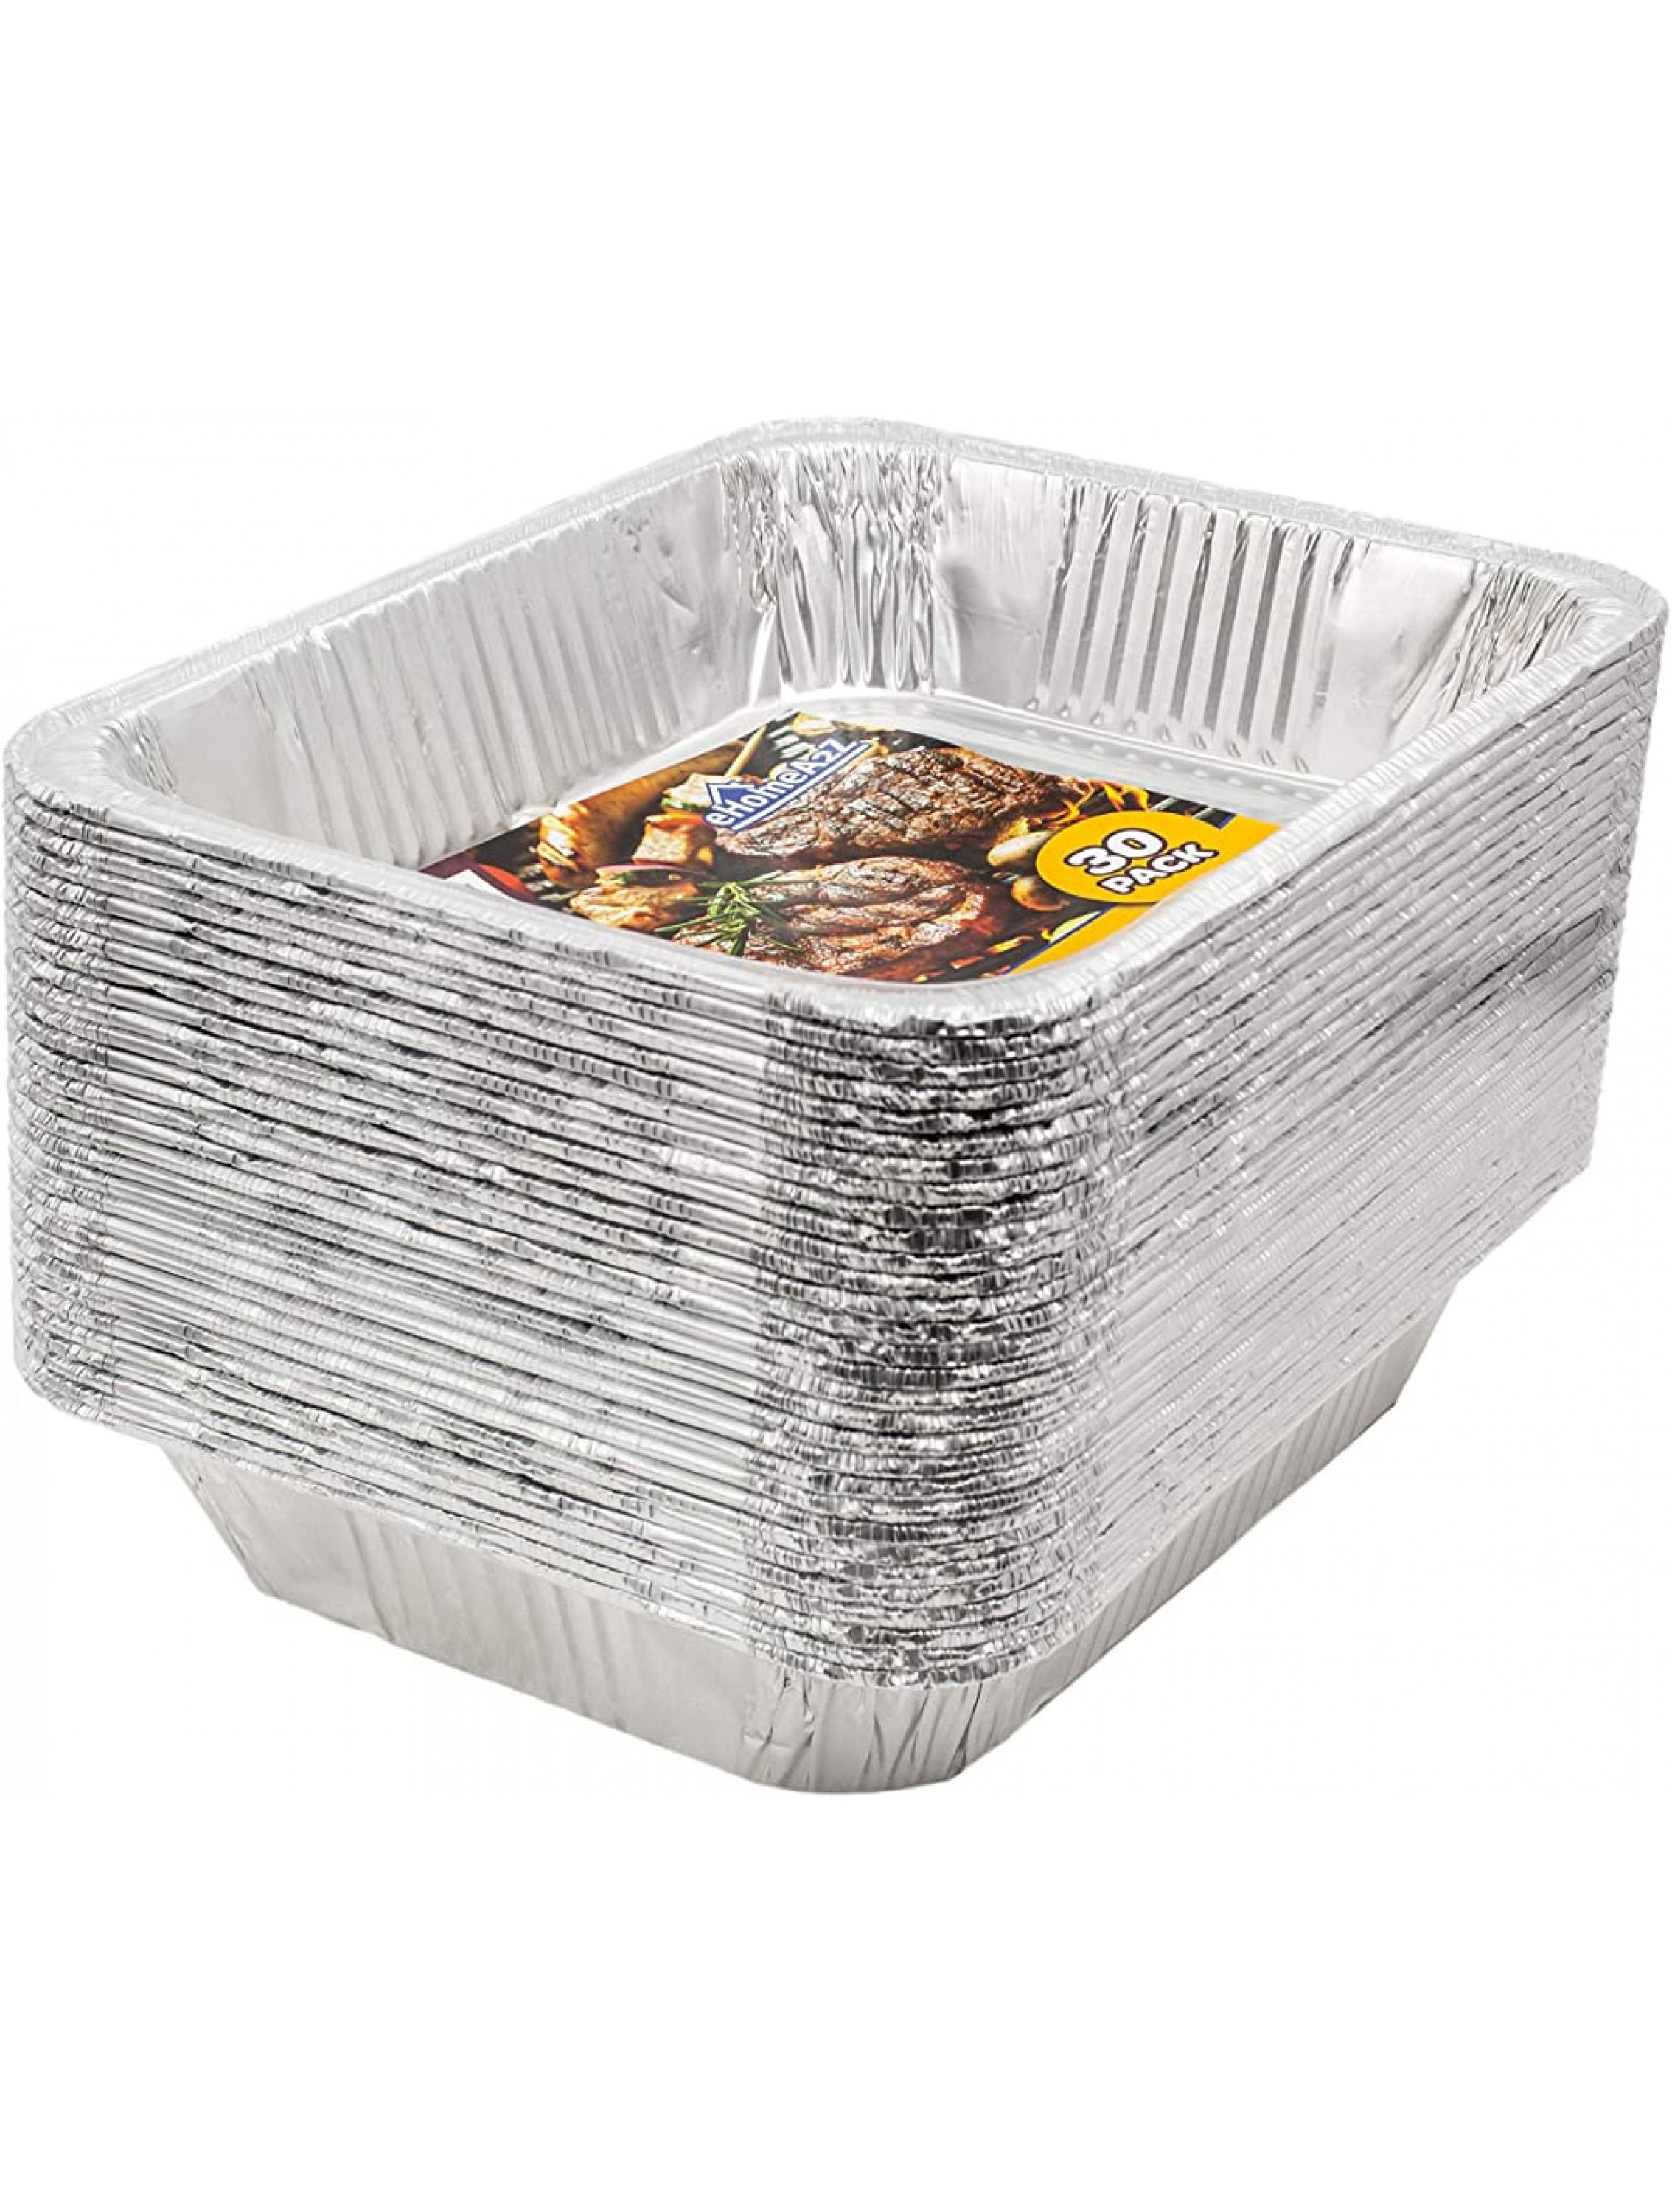 Aluminum Pans Disposable Half Size 30 Pack 9x13 Prepping Roasting Food Storing Heating Cooking Chafers Catering Crawfish Trays - B21FB05U4